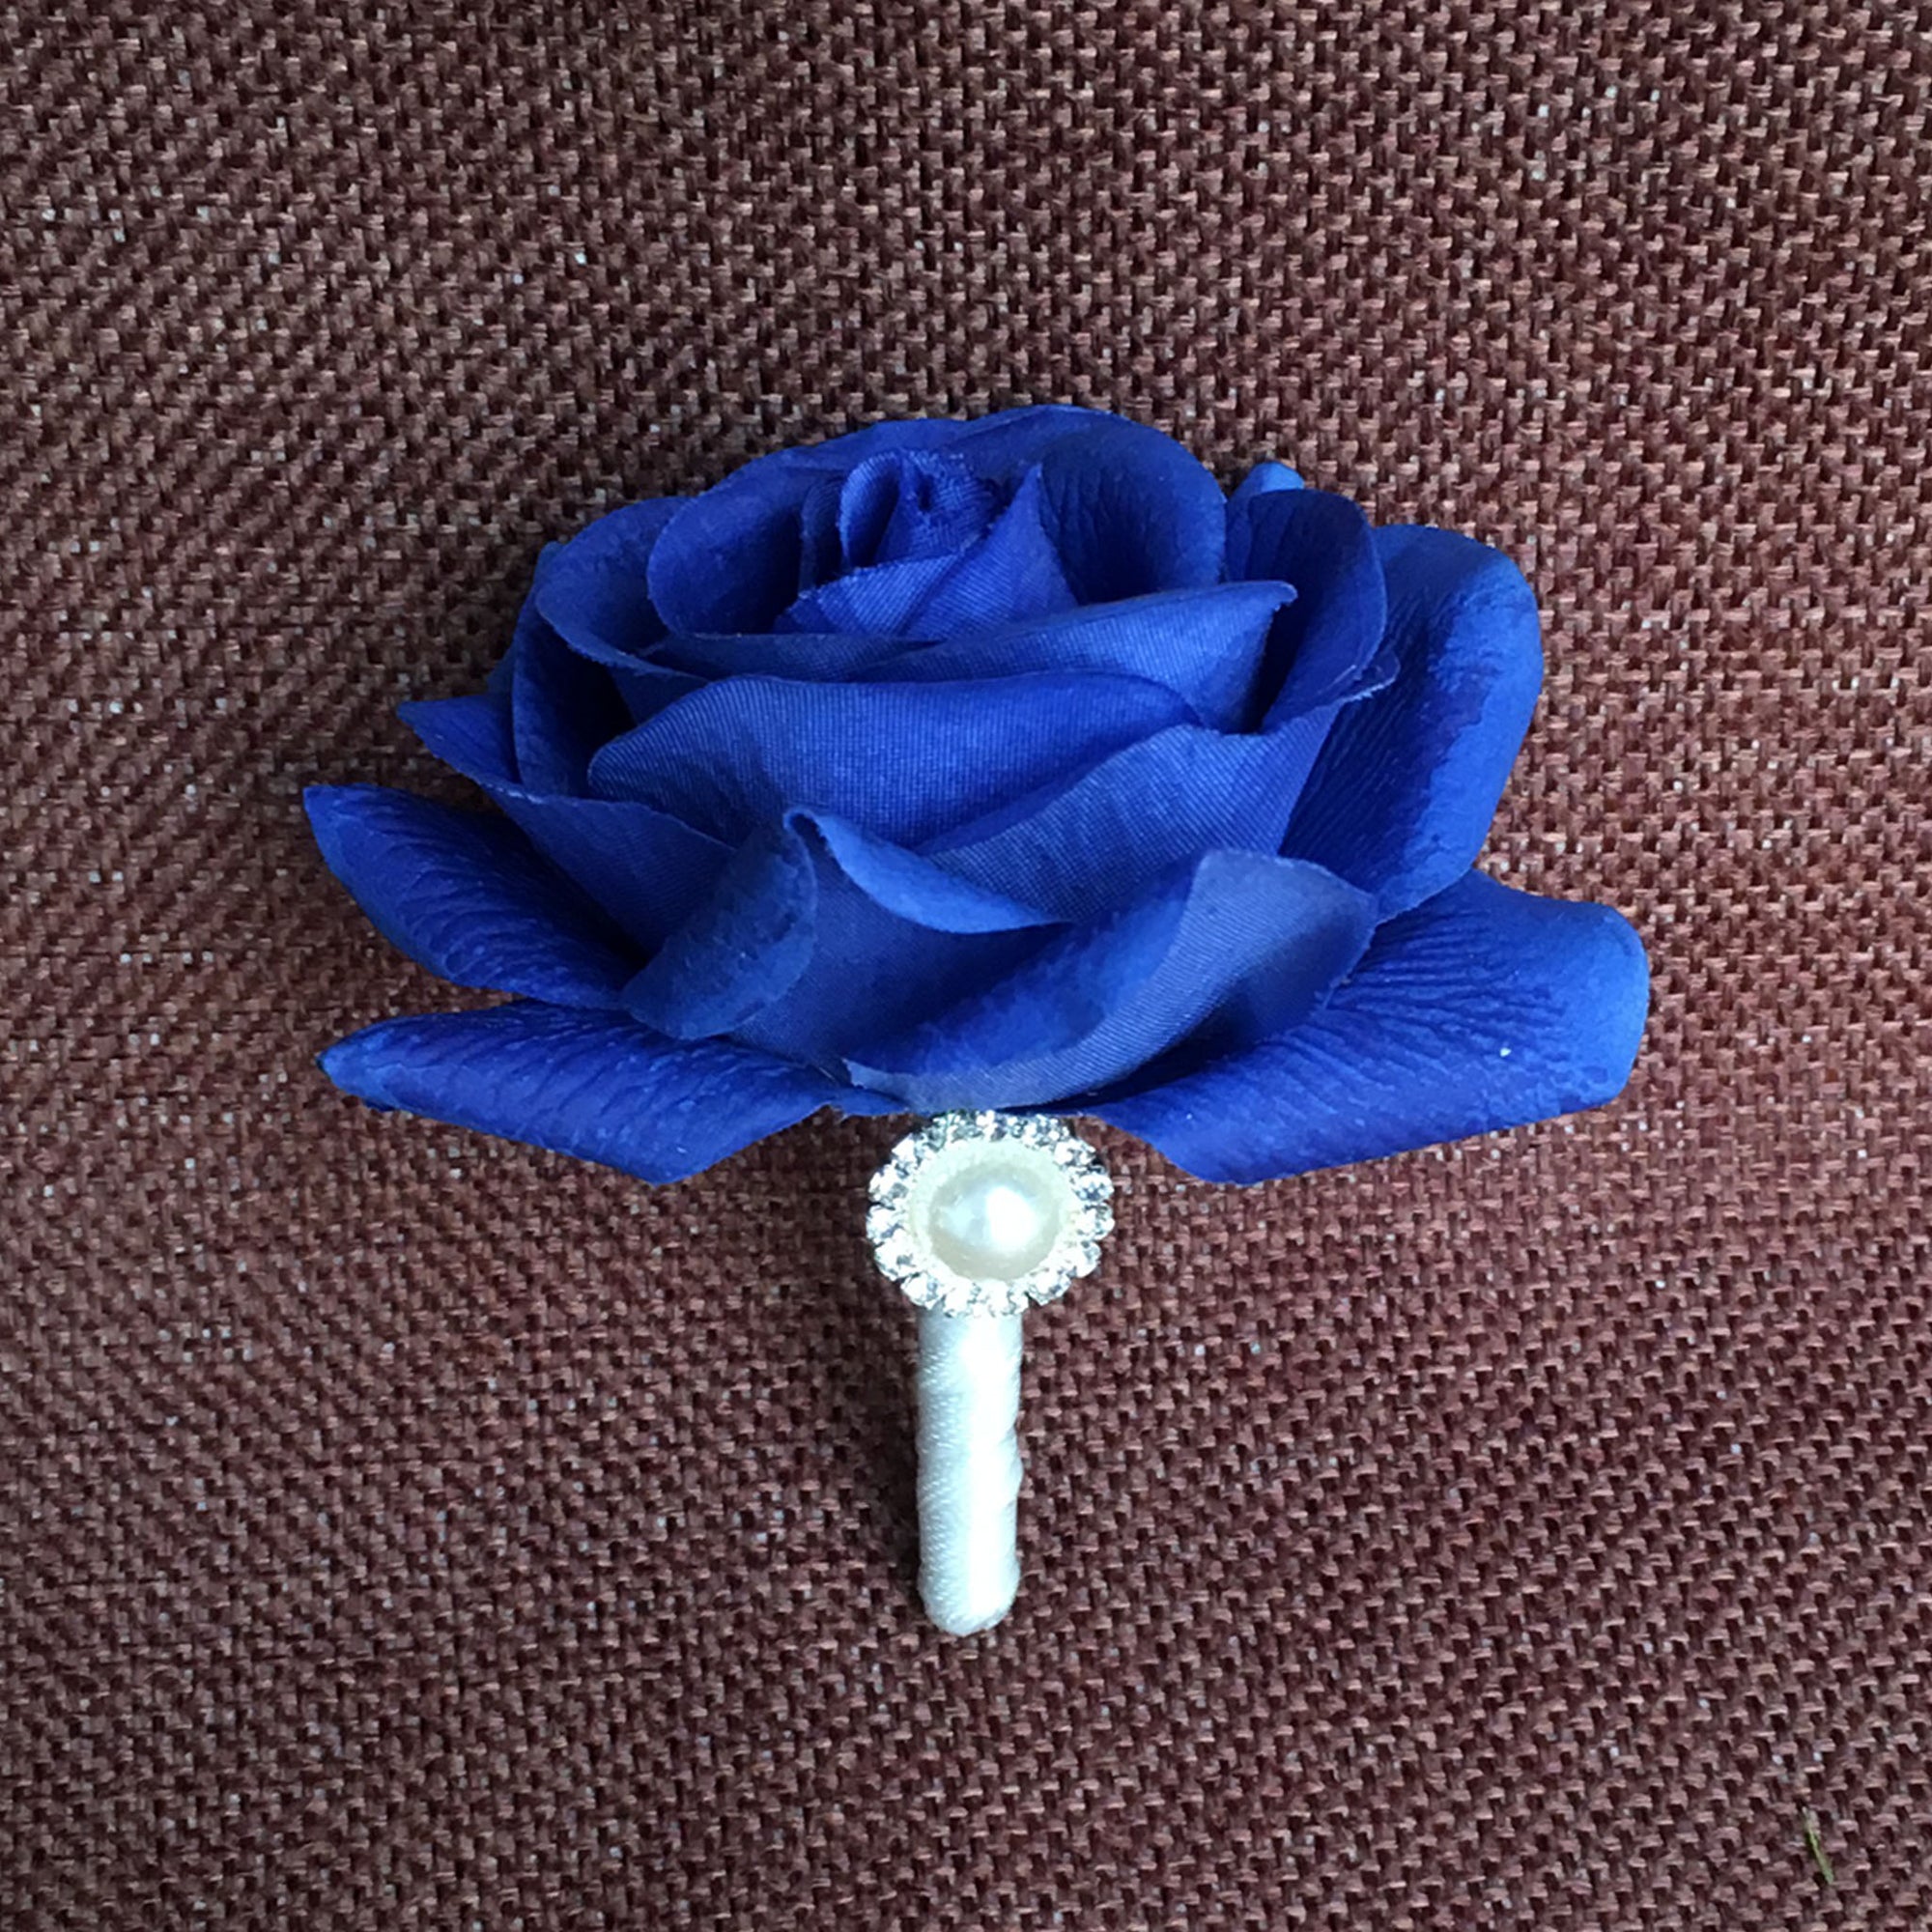 Real Touch Bridal Bouquet Royal Blue Wedding Flowers Boutonnieres Corsages Sets